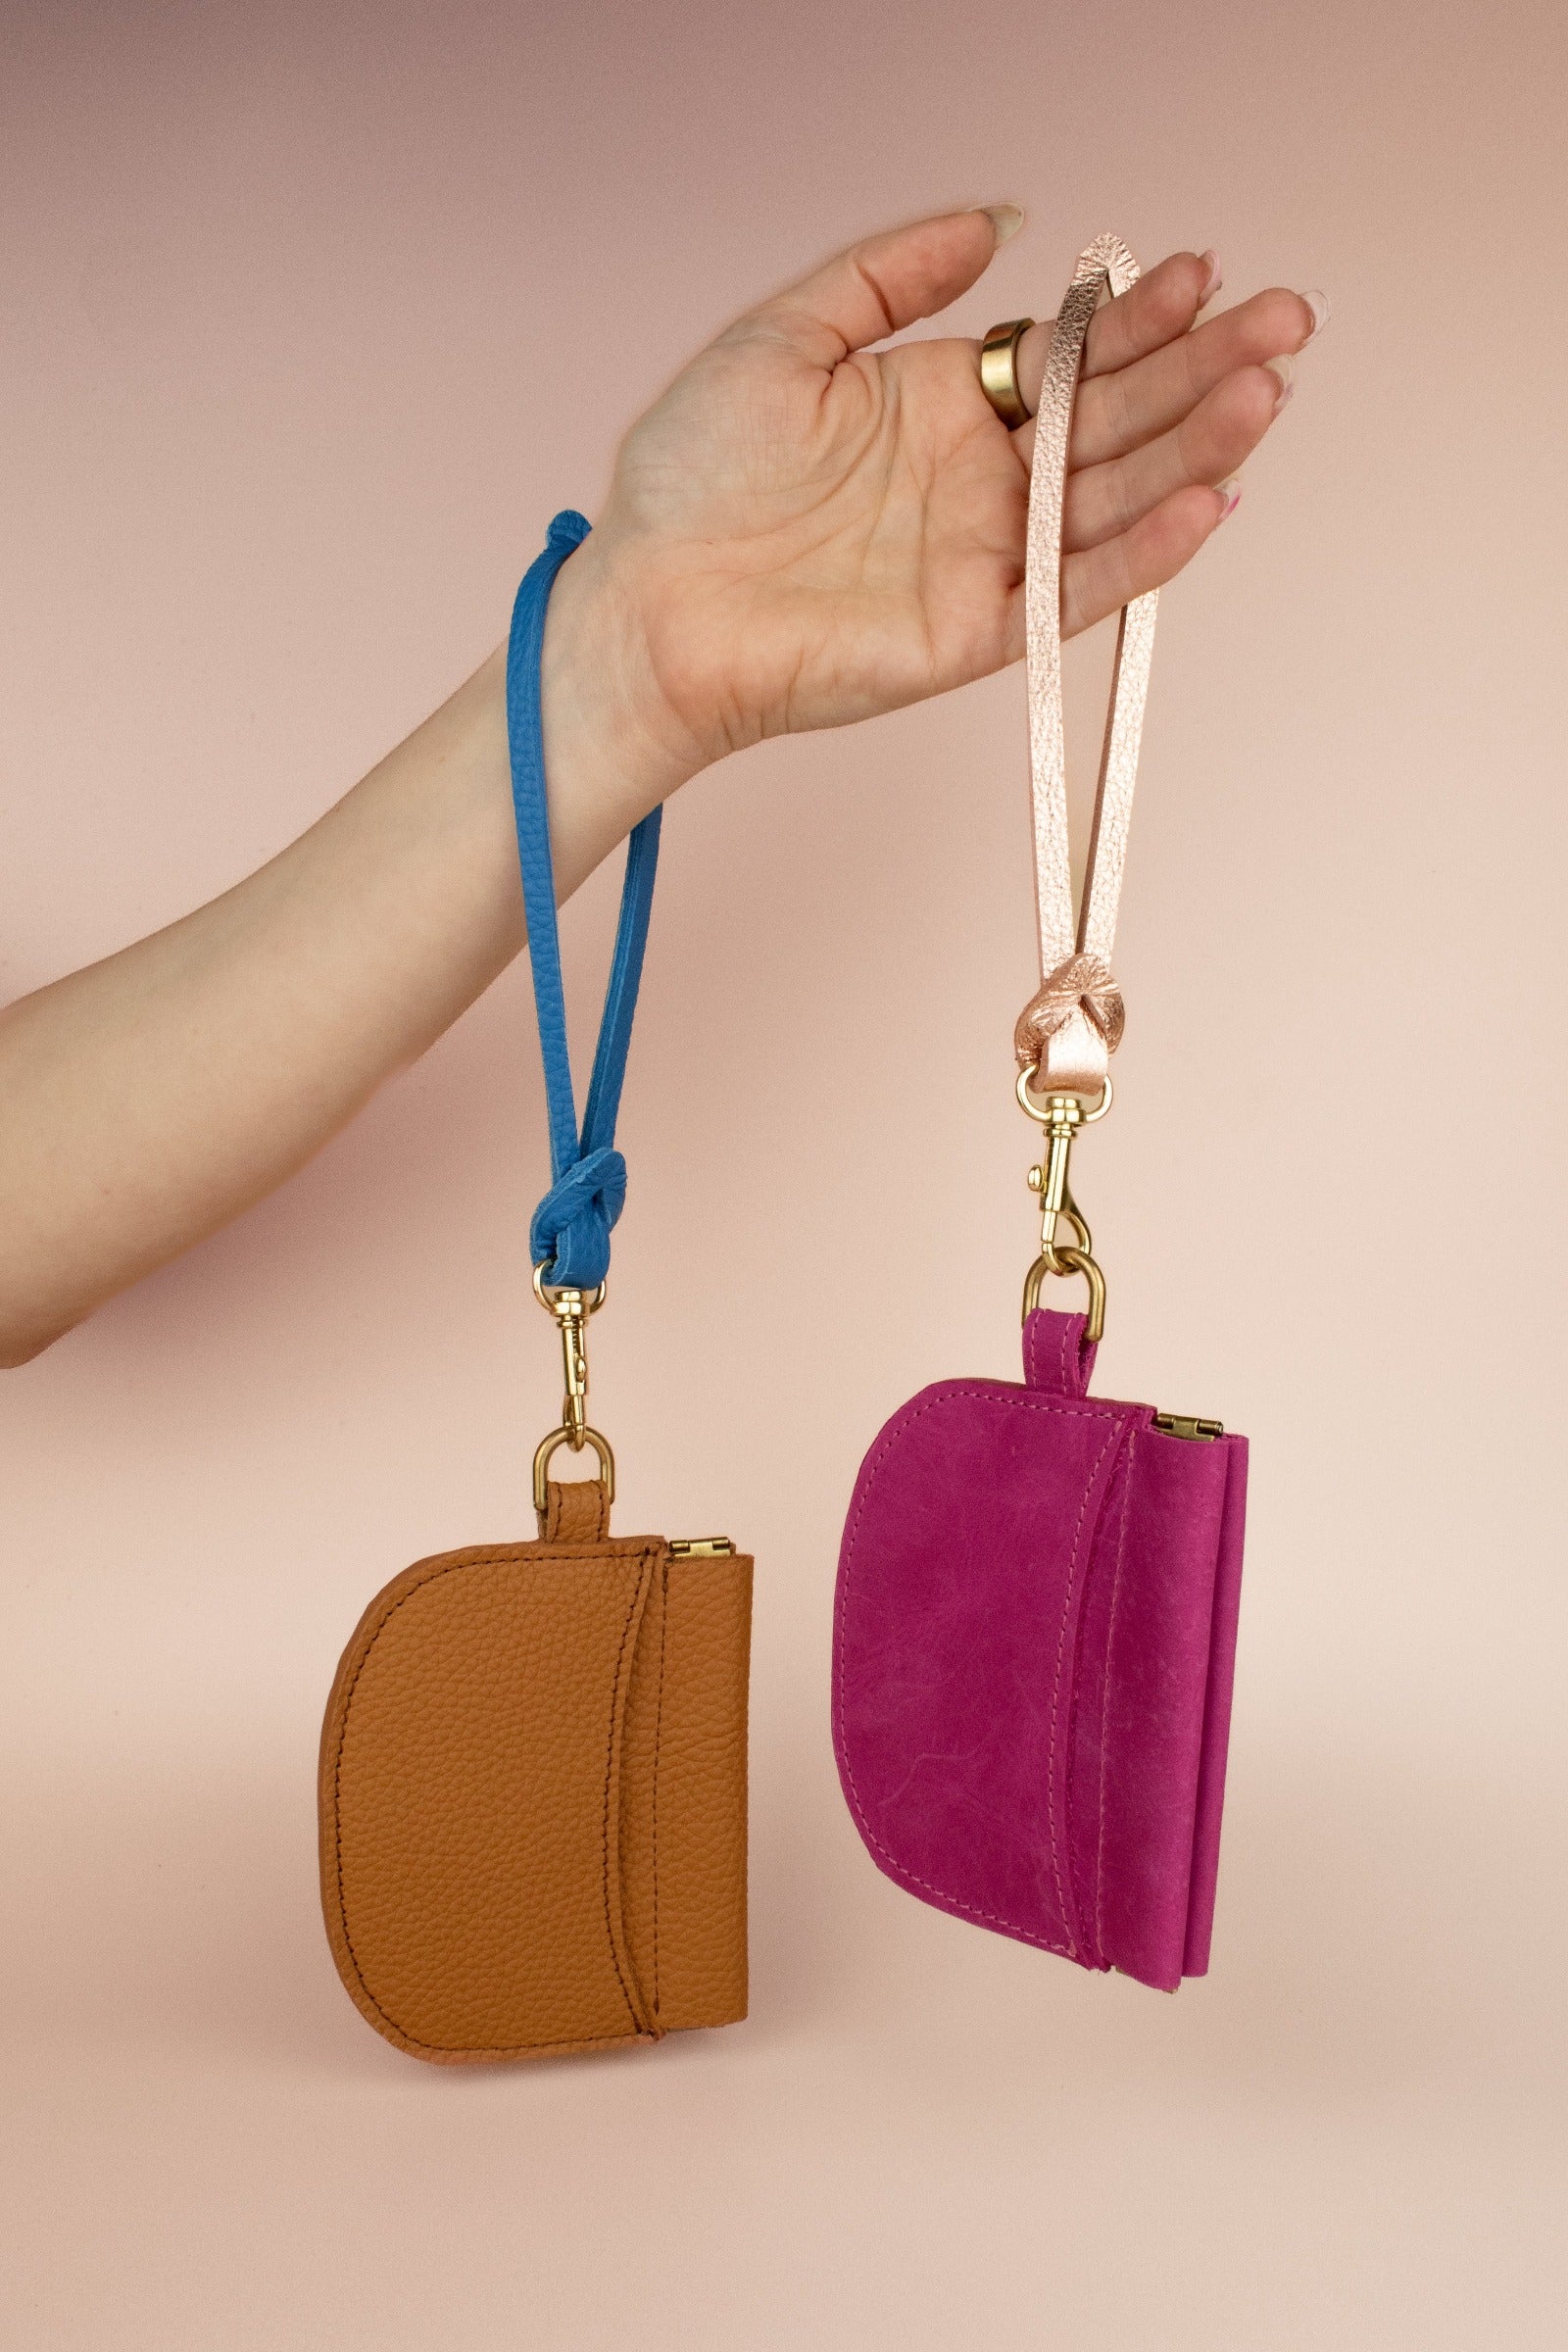 pop wallet wristlet in caramel brown and barbie pink with matisse blue keychain and rose gold keychain